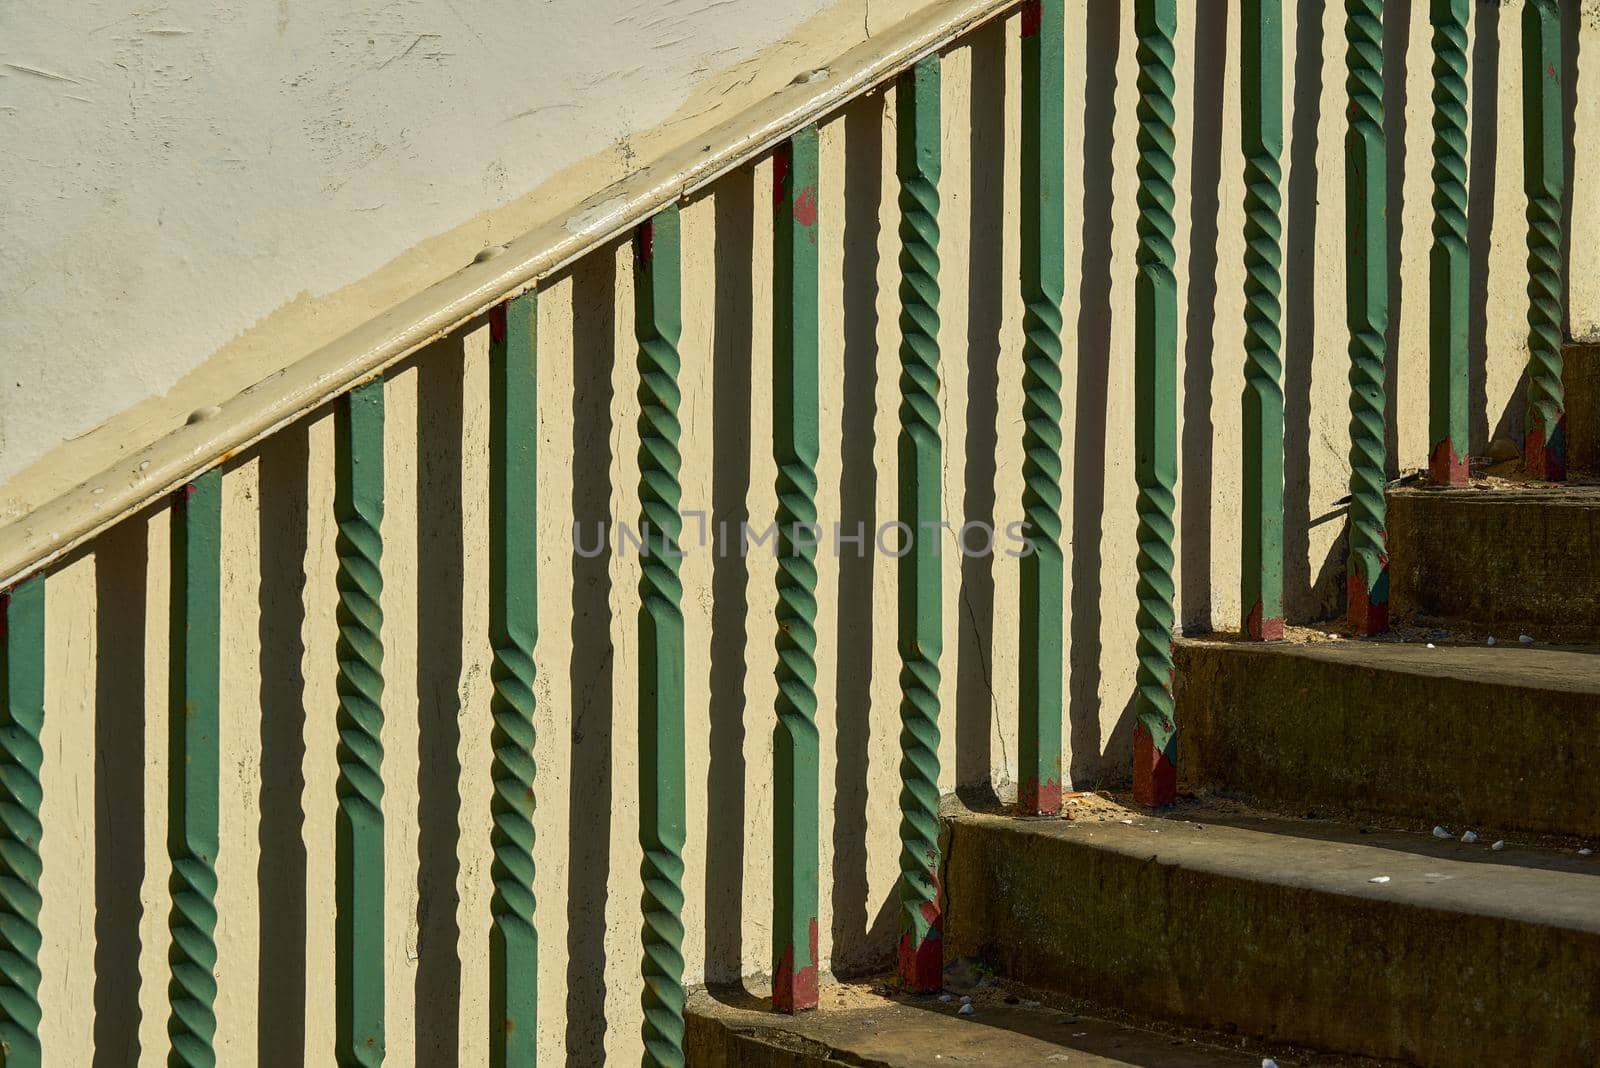 An abstract photo of green railings and concrete steps by ChrisWestPhoto